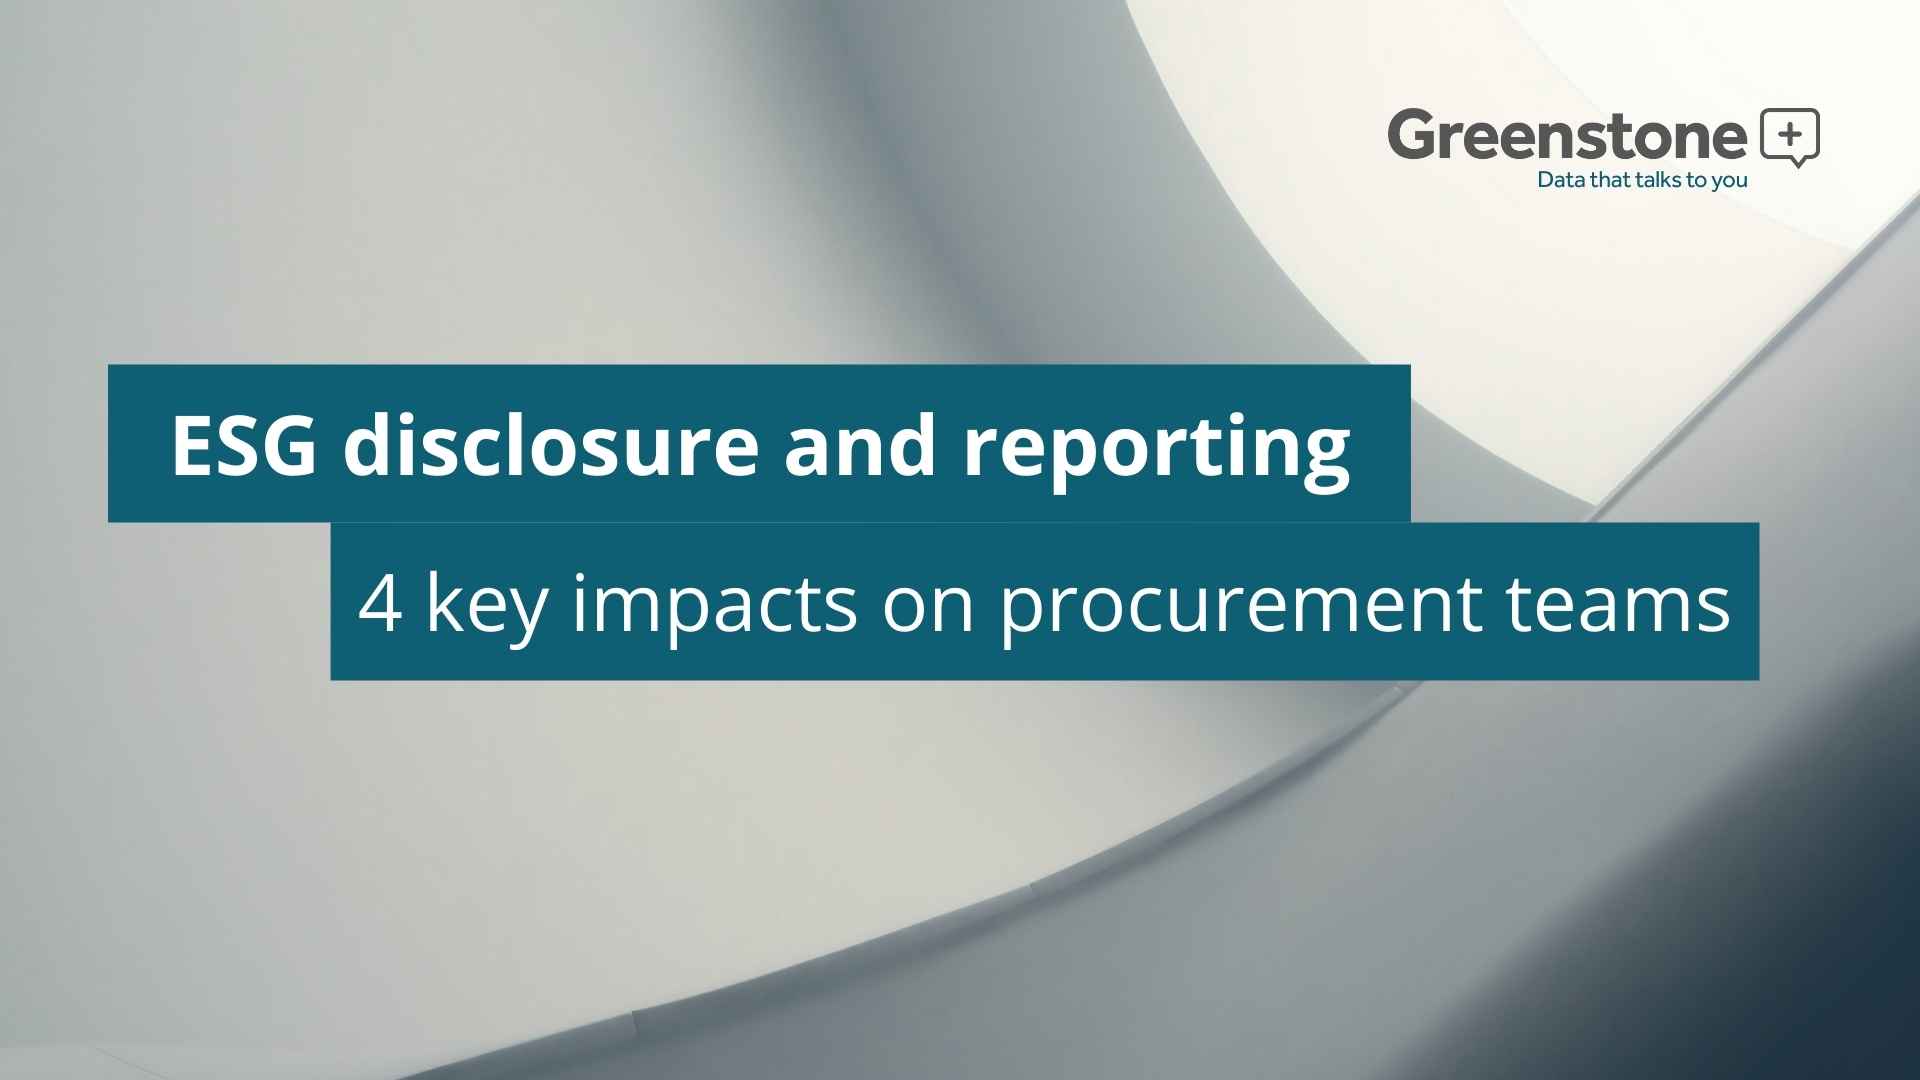 ESG disclosure and reporting - 4 key impacts on procurement teams